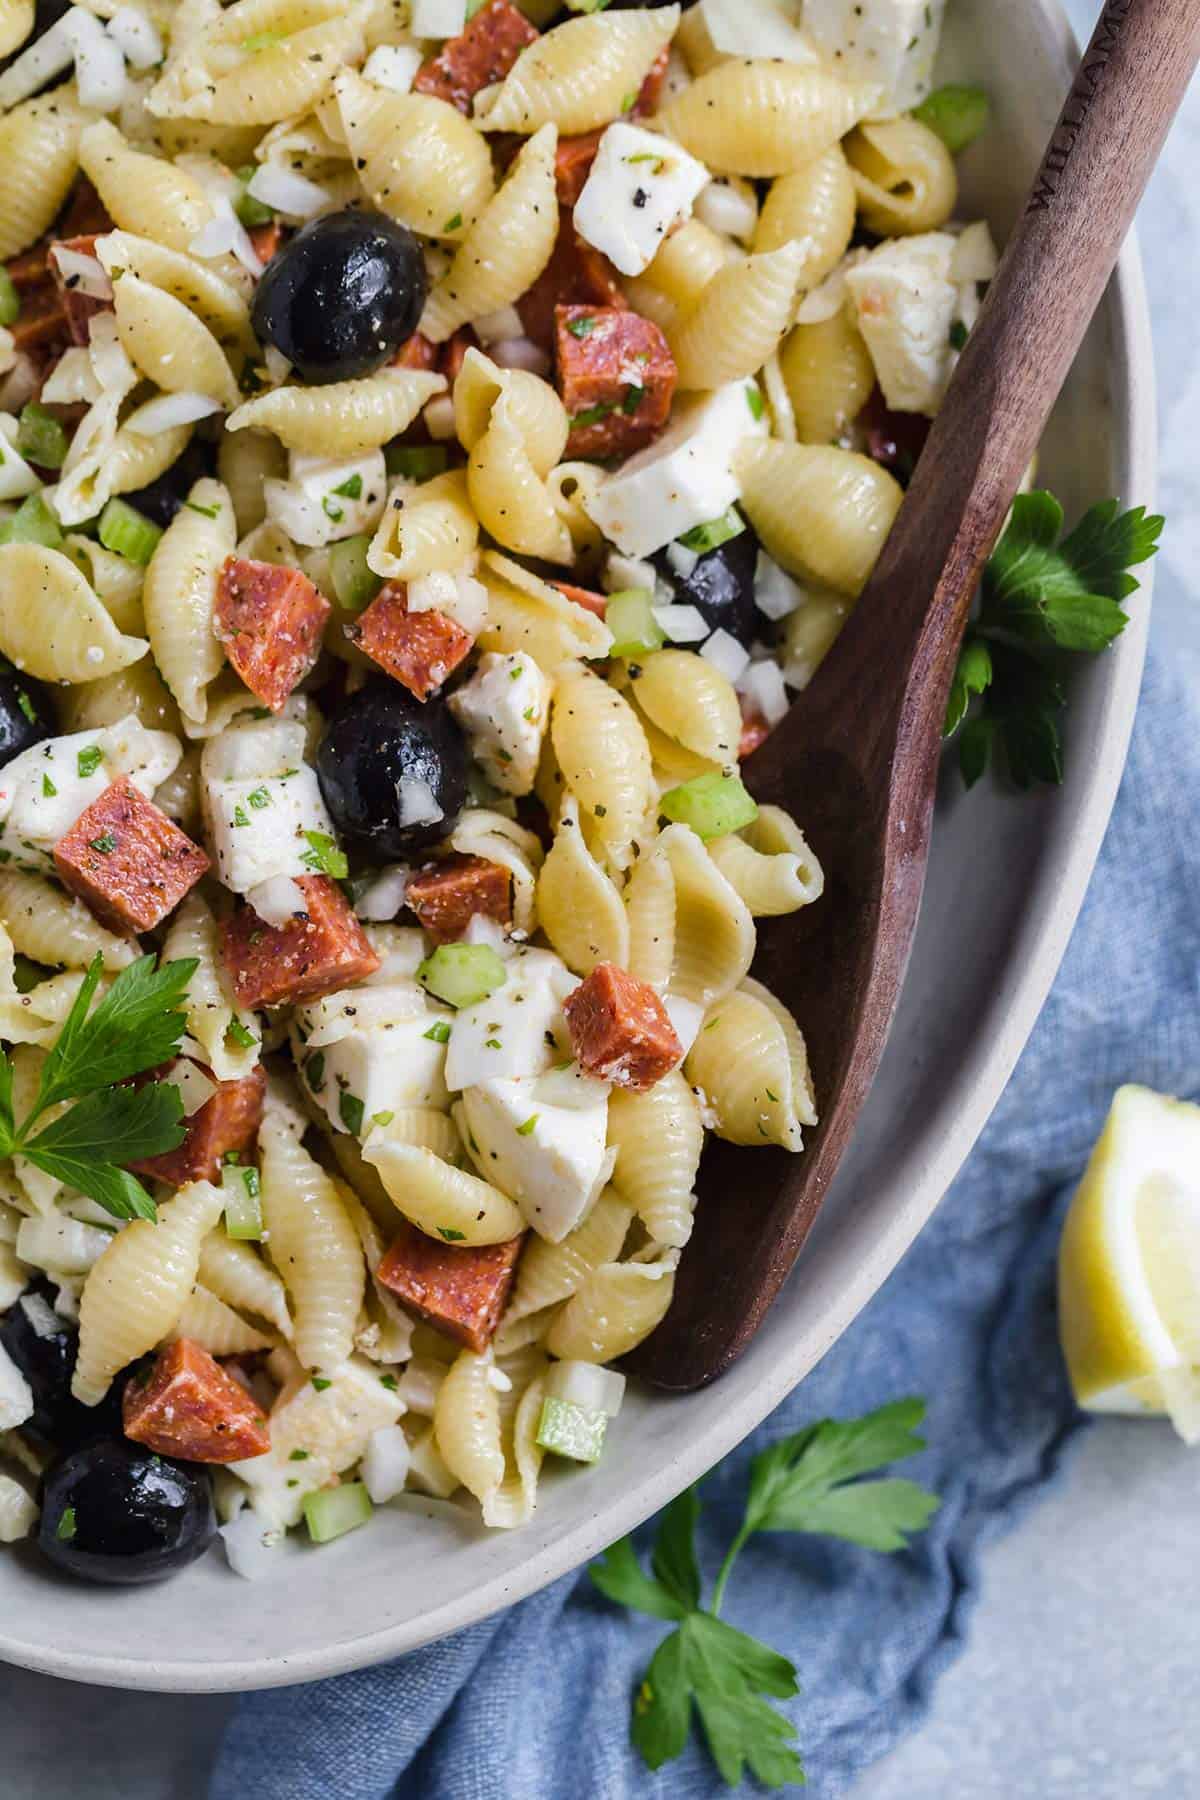 Close up photo of bowl of Italian pasta salad with wooden spoon.